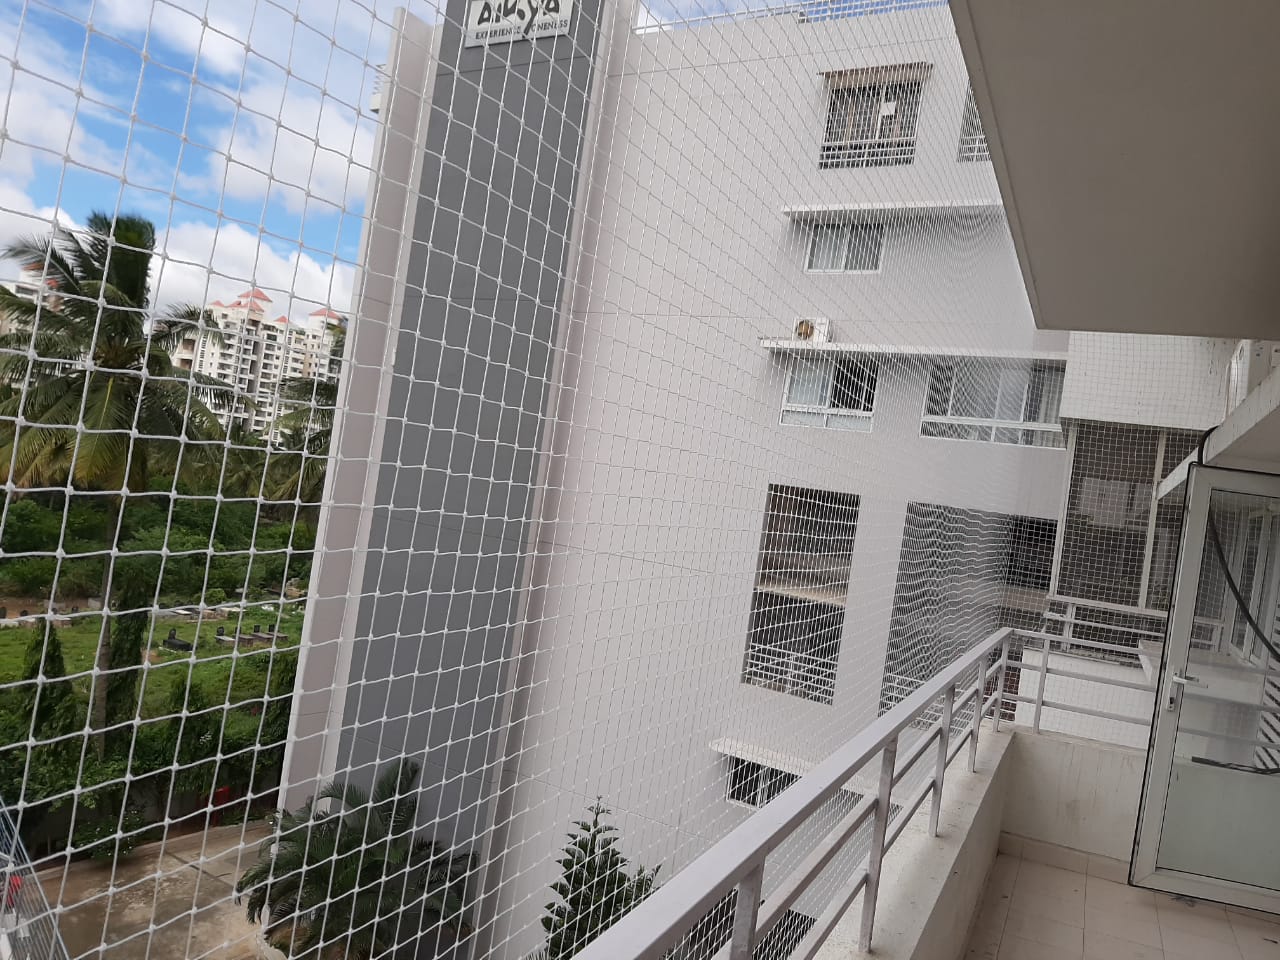 Pigeon Safety Nets For Balconies In Bangalore Call 9900767340 For Same Day Installation